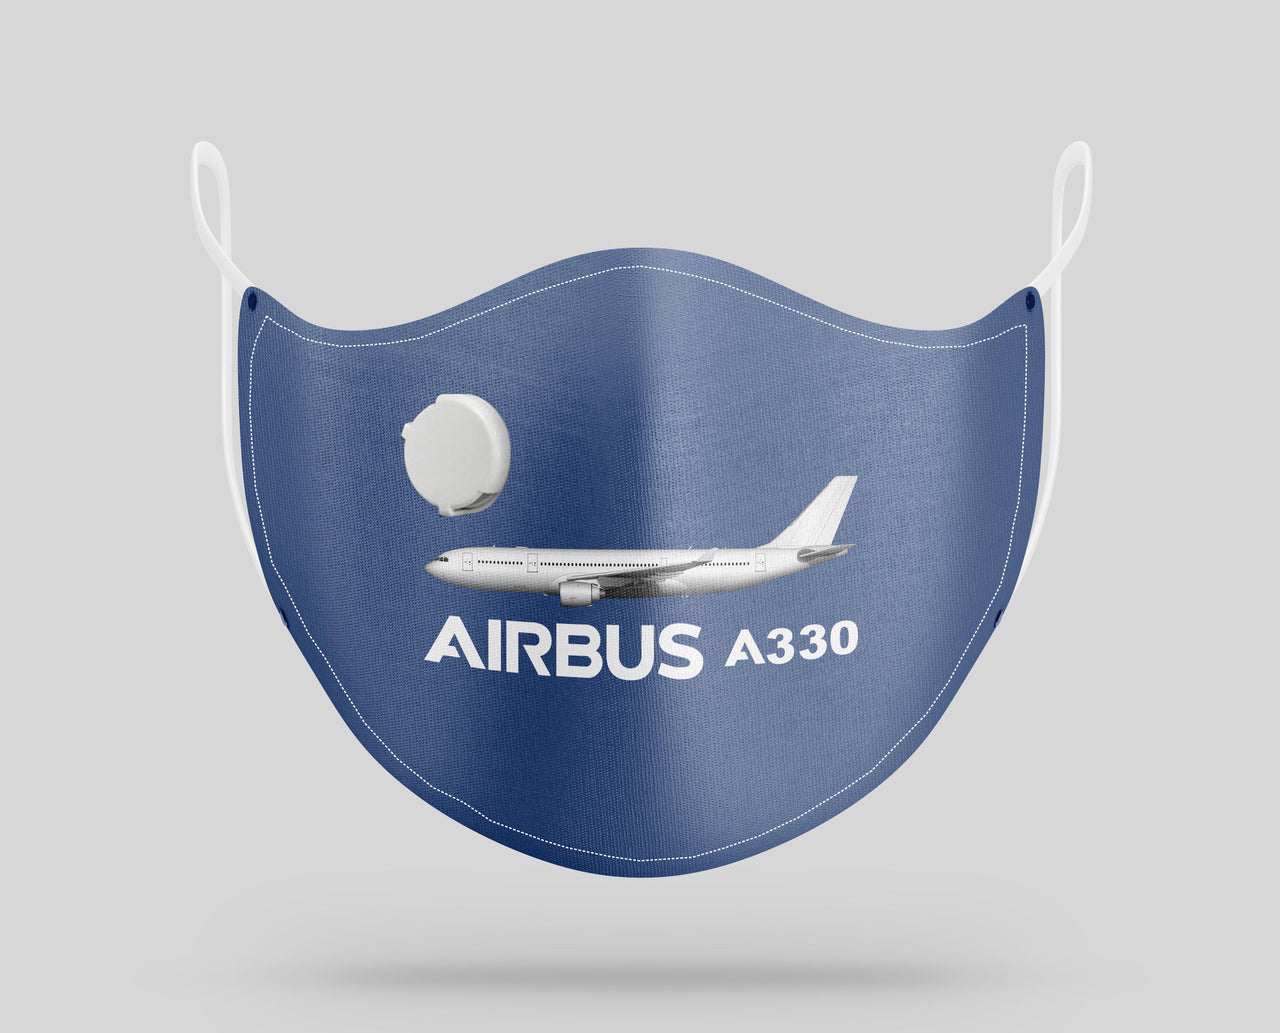 The Airbus A330 Designed Face Masks